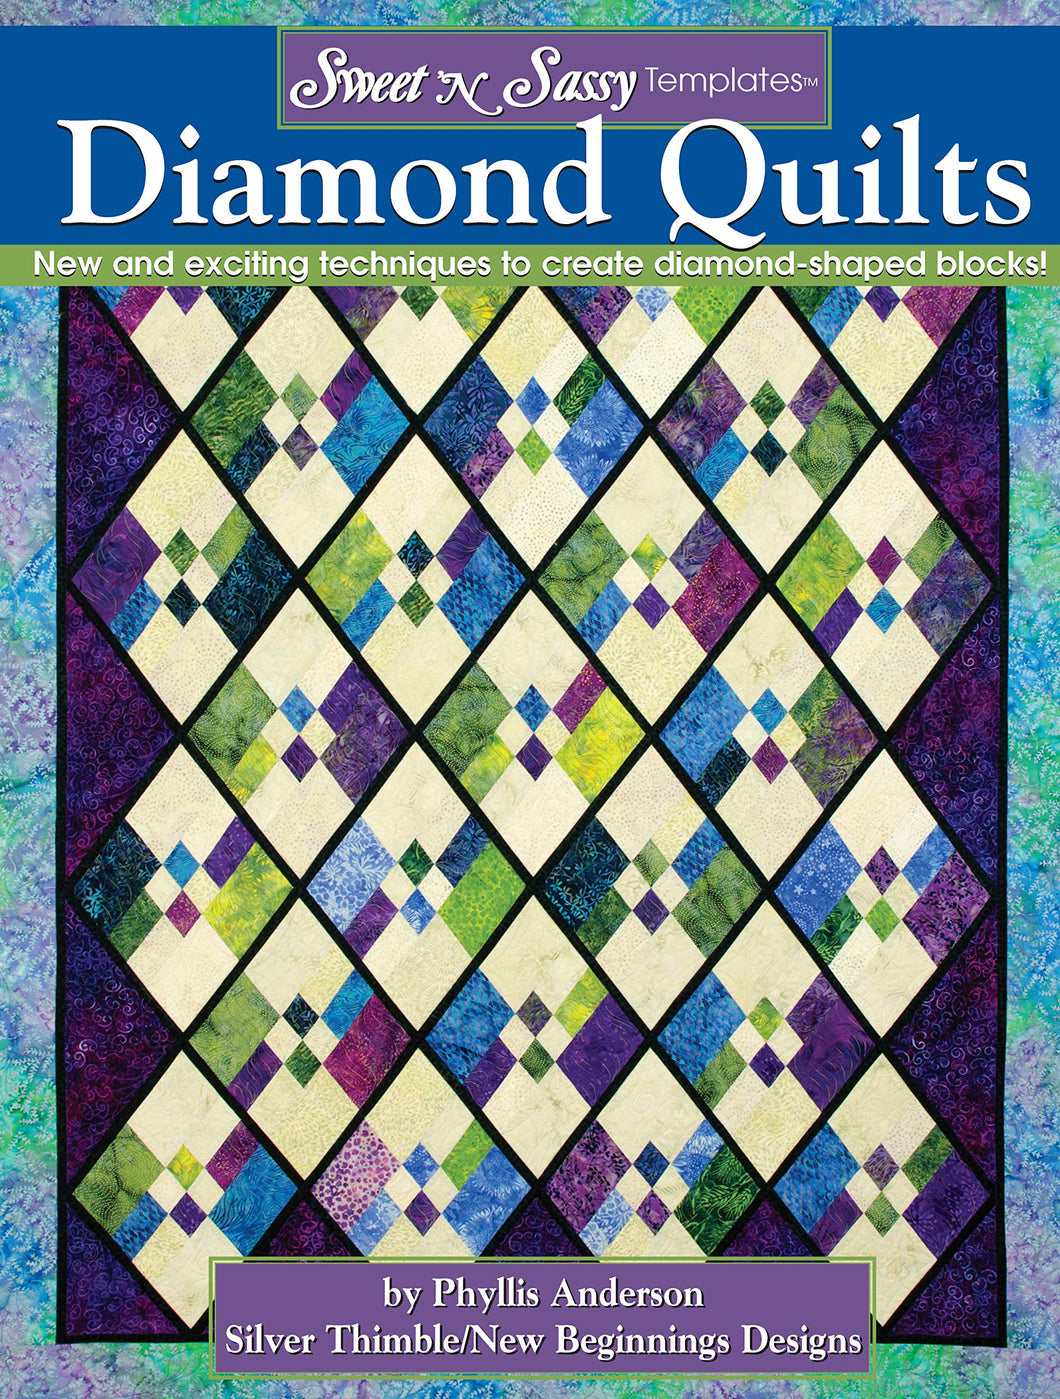 Sweet 'N Sassy Templates® Diamond Quilts: New and exciting techniques to create diamond-shaped blocks!